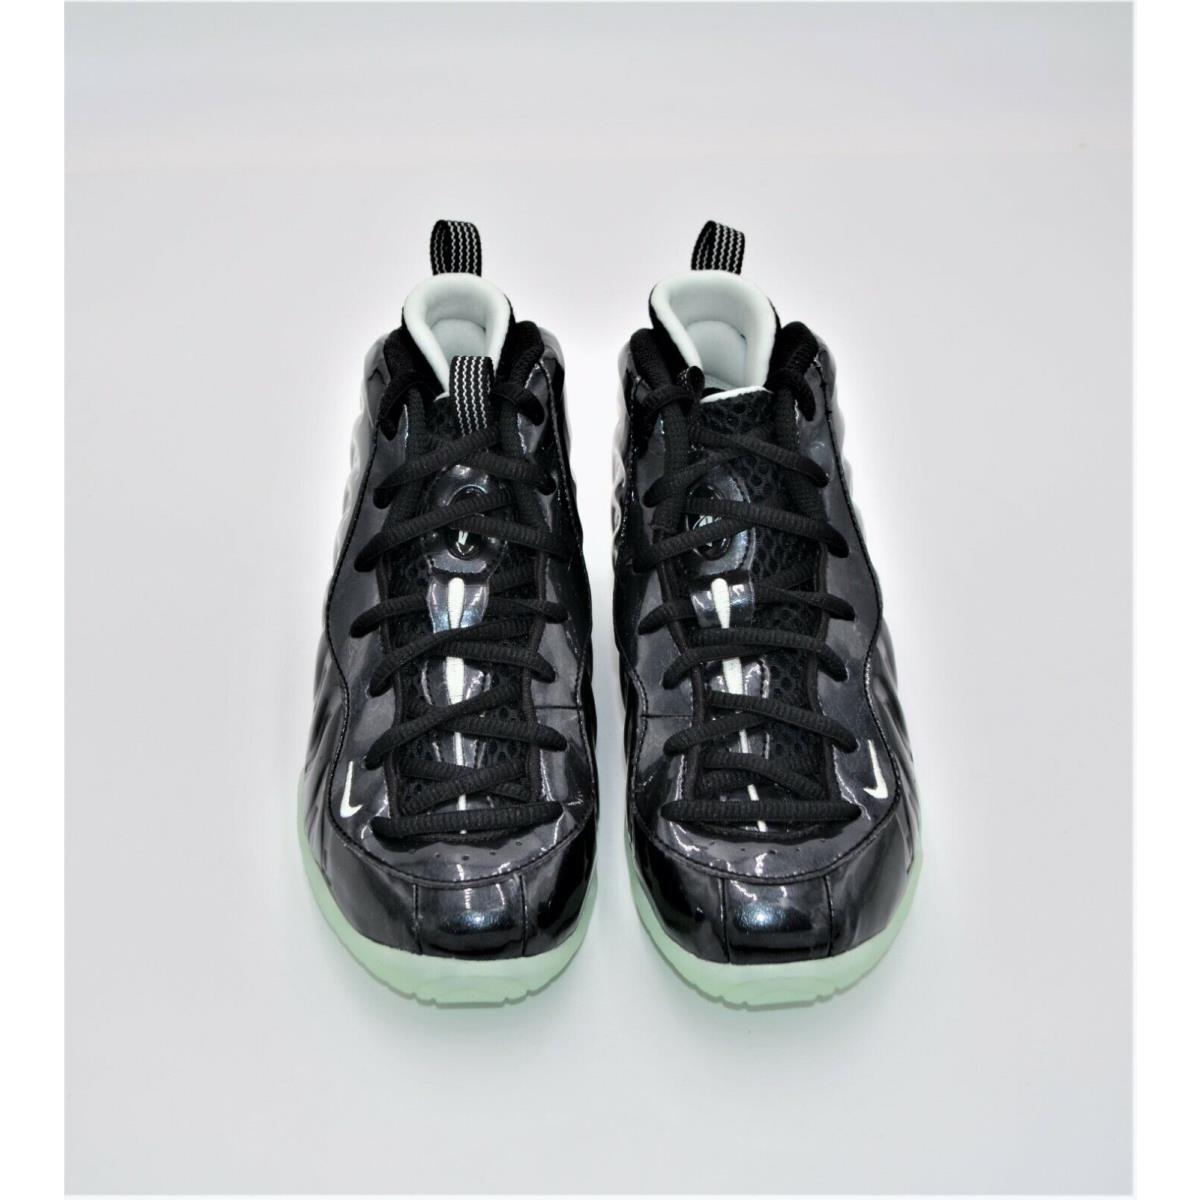 Nike shoes little posite one - Black 1